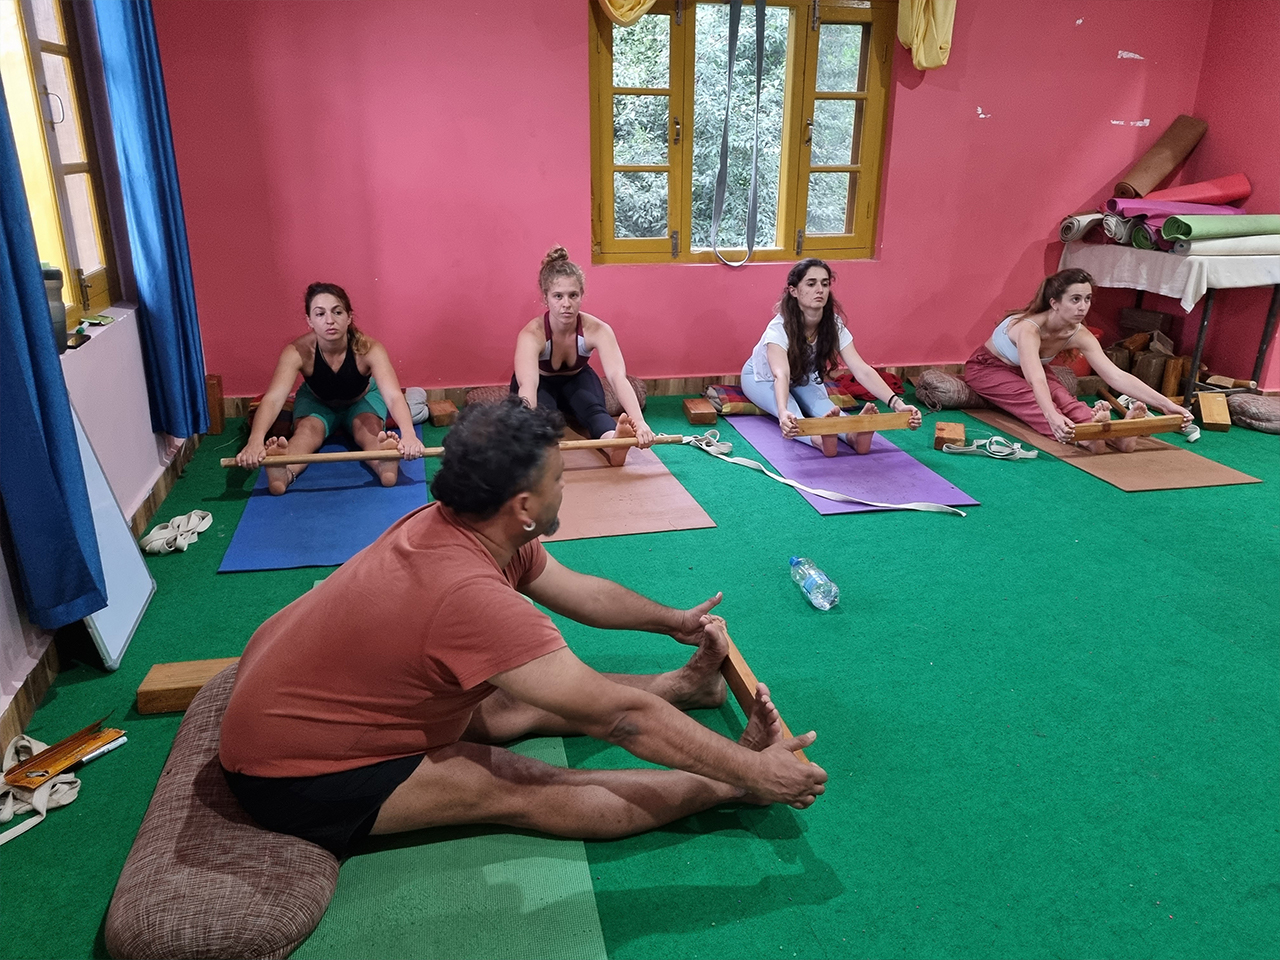 Daily drop-in yoga classes